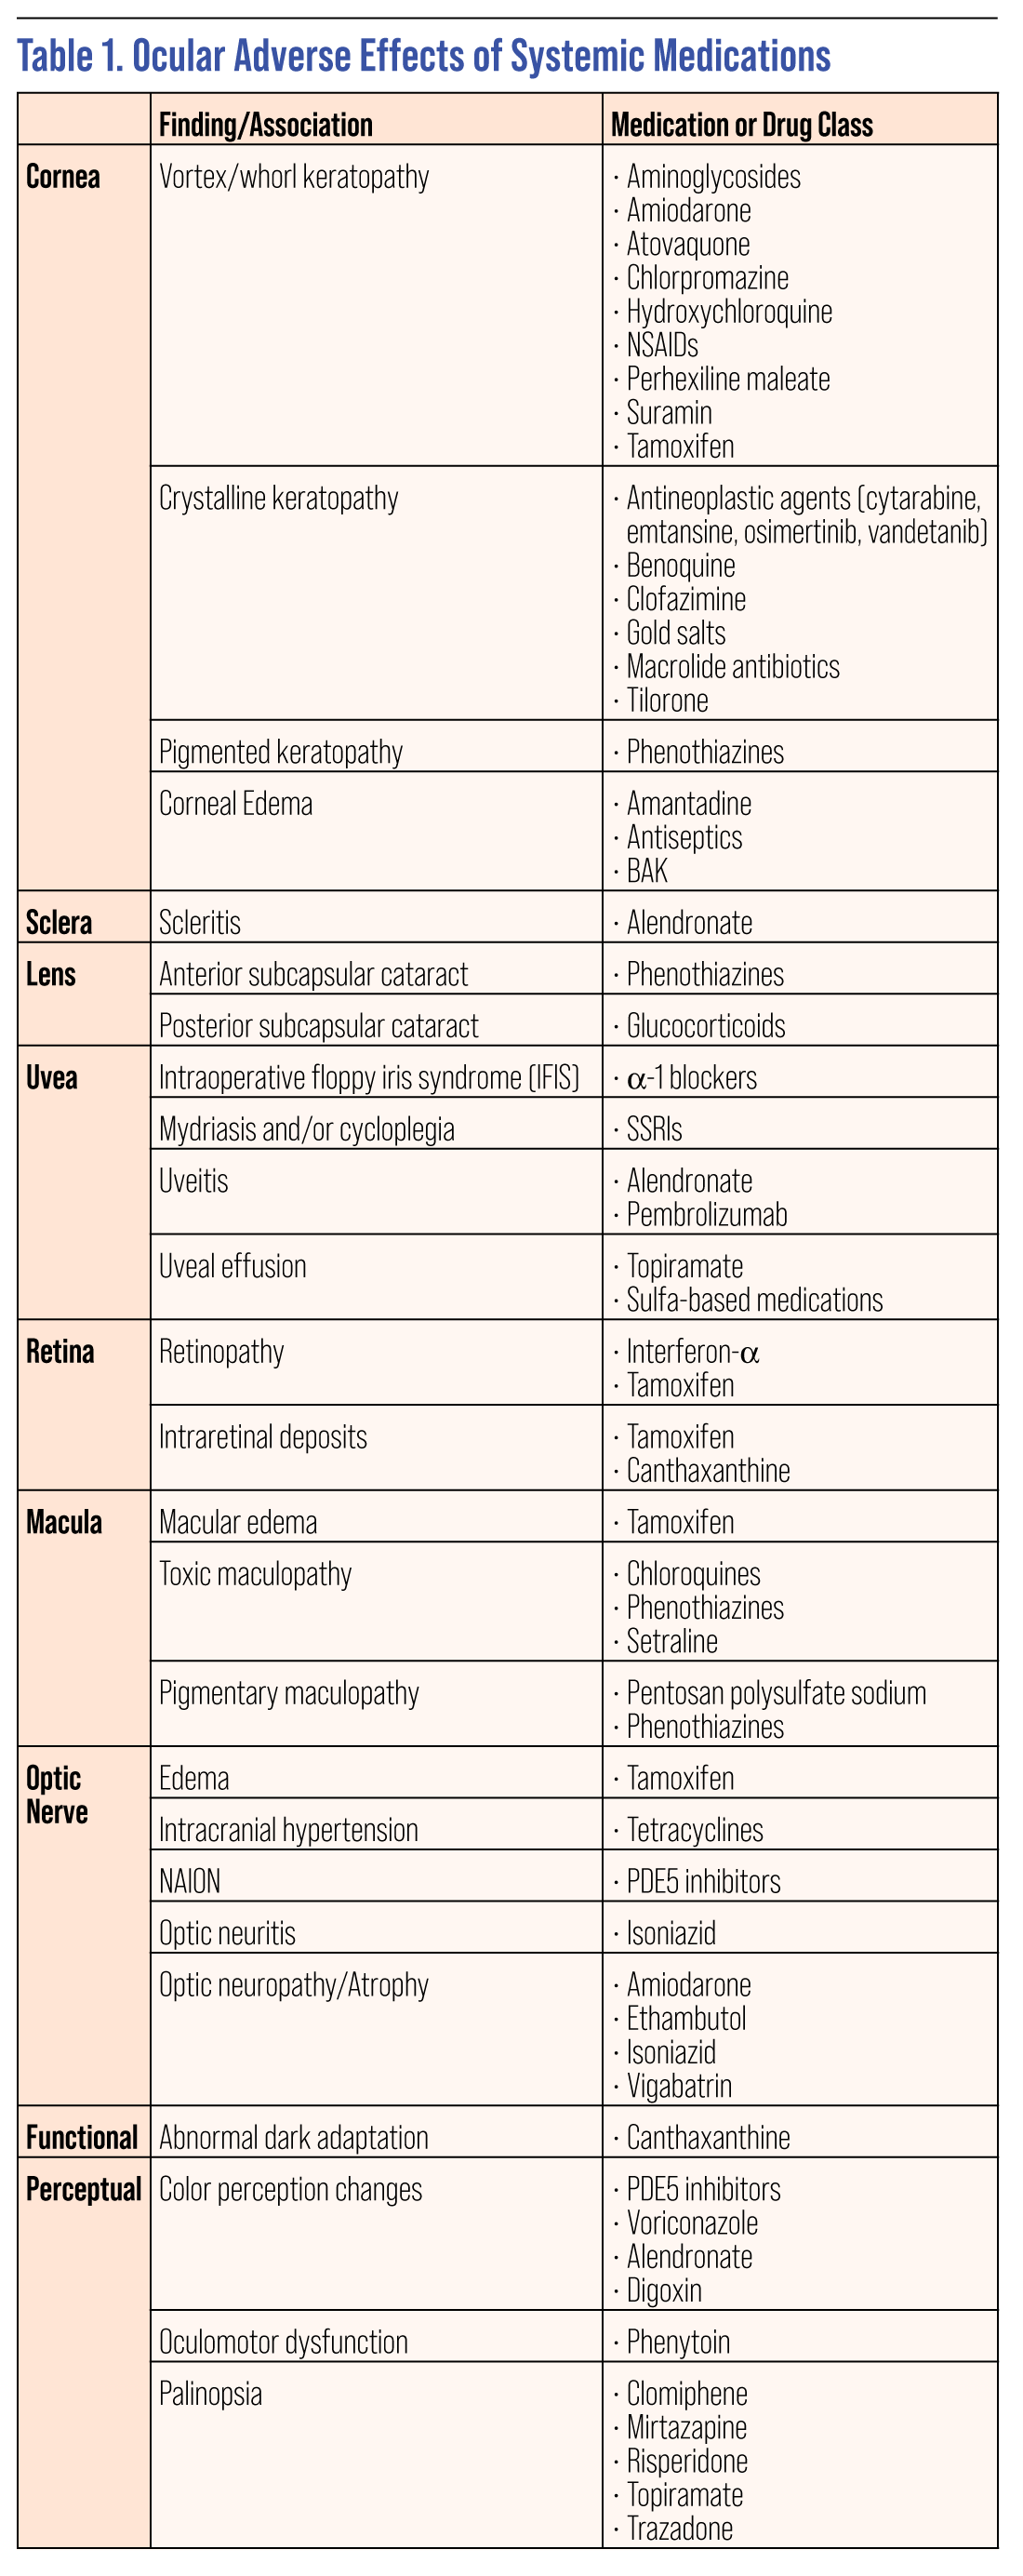 Table 1. Ocular Adverse Effects of Systemic Medications